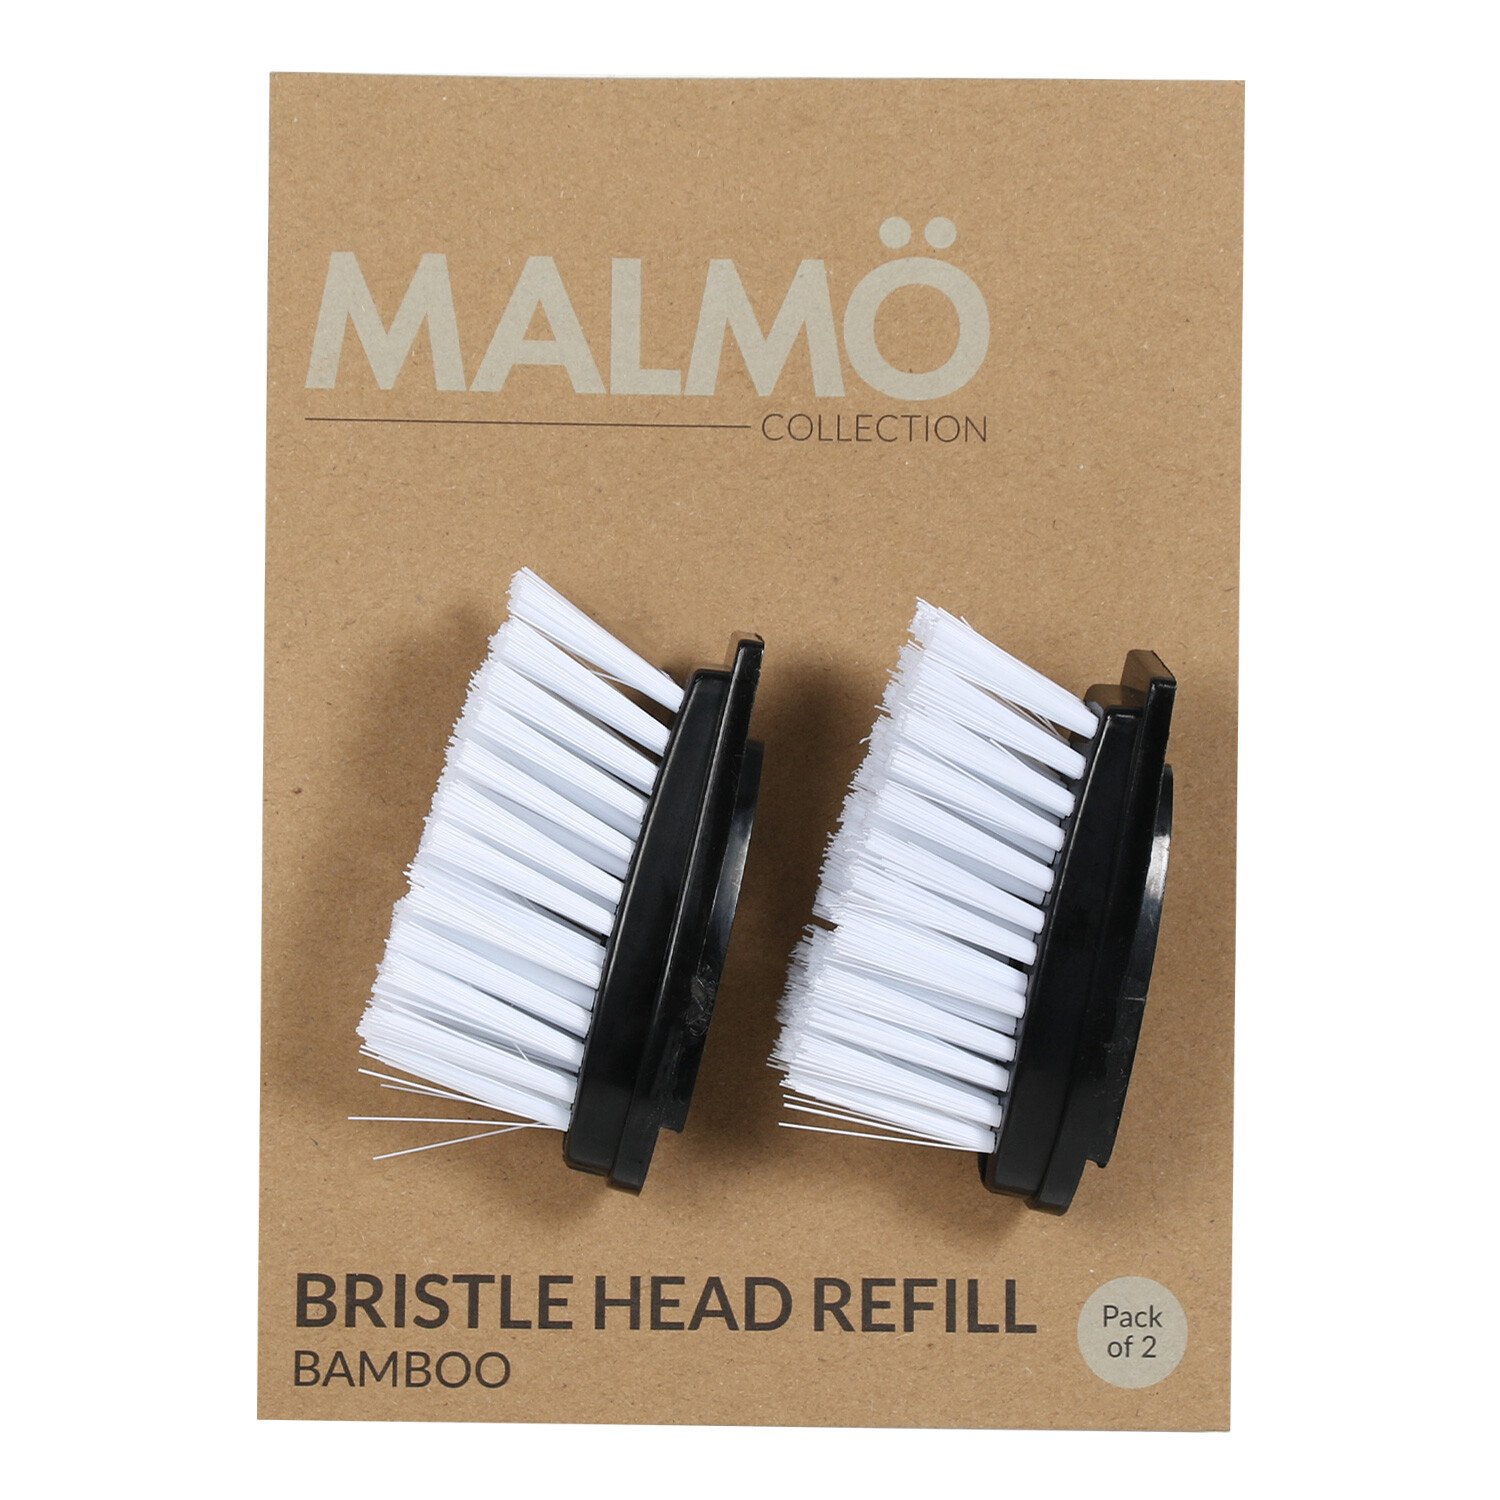 Pack of 2 Malmo Bamboo Bristle Refill Heads Image